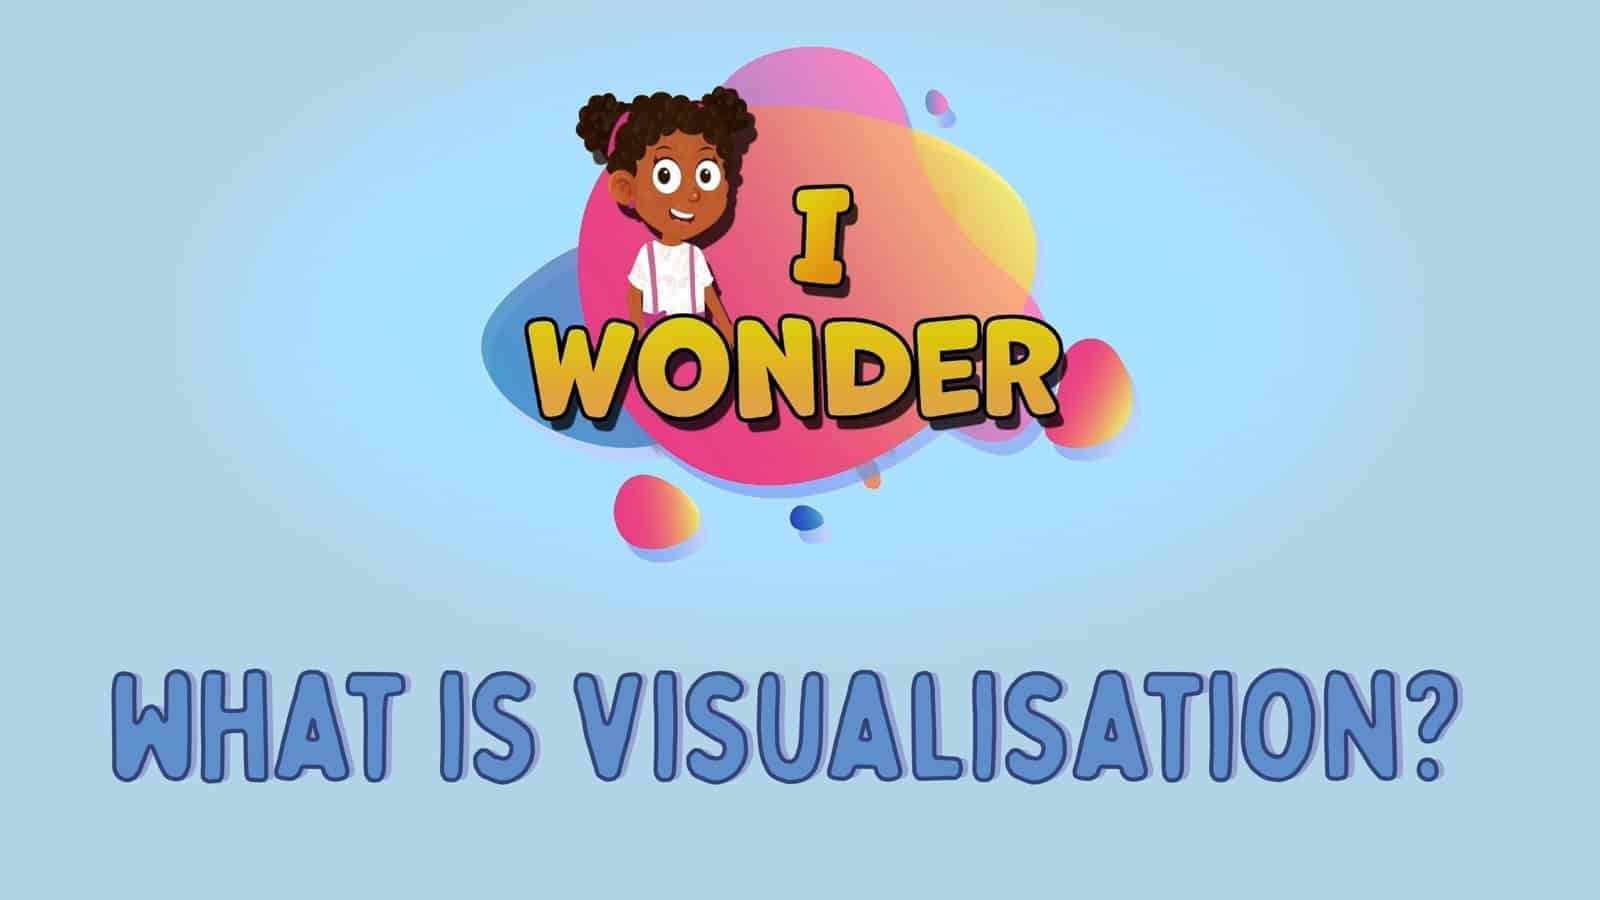 What Is Visualisation?